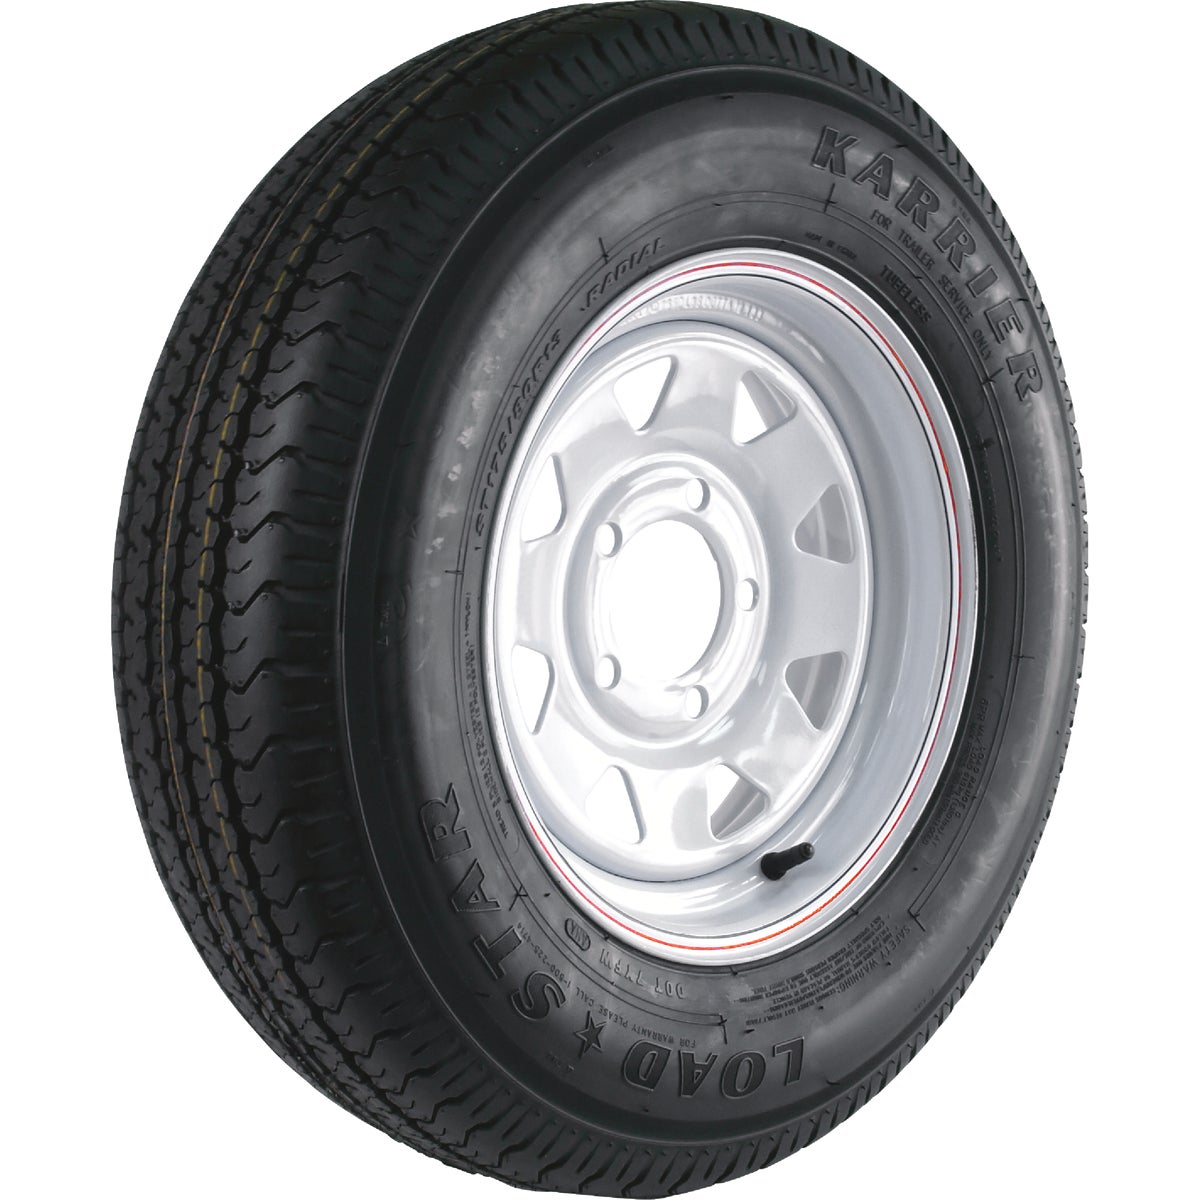 Trailer Tire and Wheel